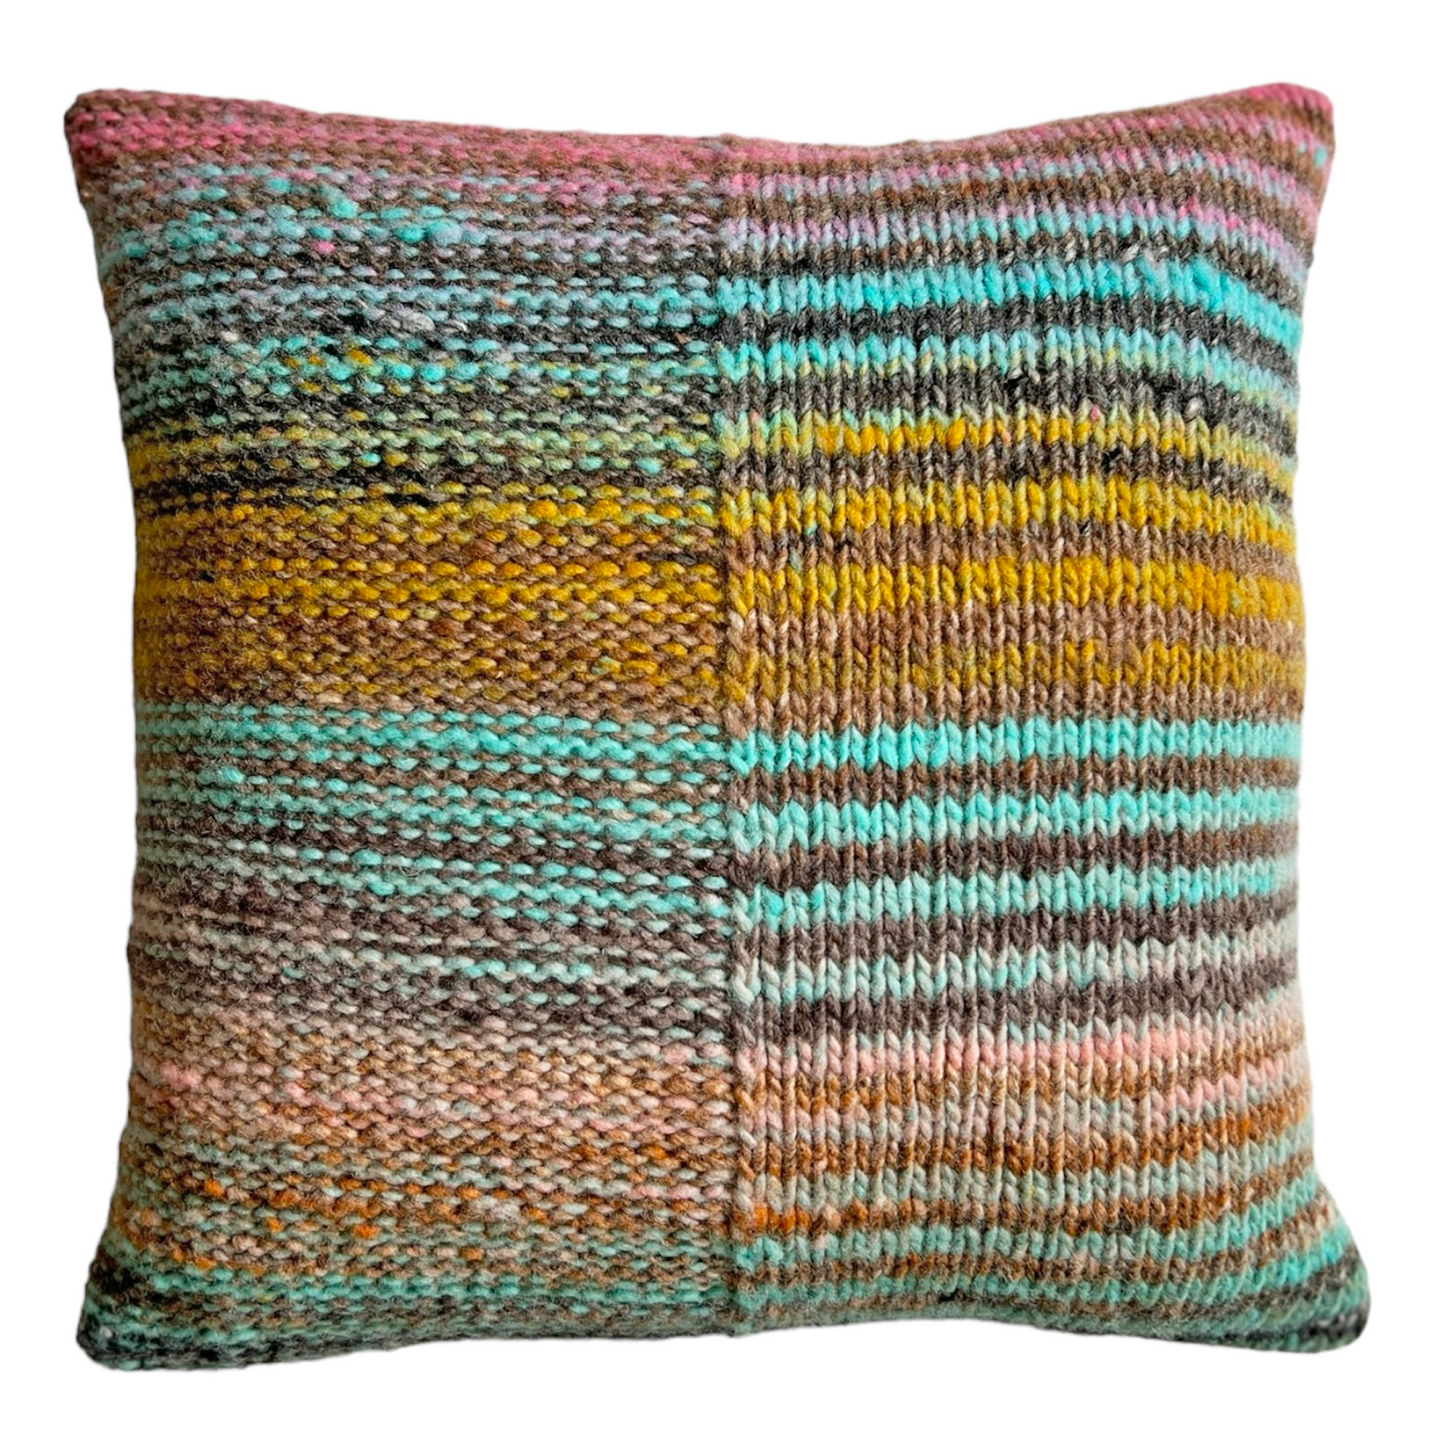 Two sides of the same coin! This hand-knit pillow is split right down the middle, with stockinette on the right and reverse stockinette on the left. Featuring alternative stripes in subtle pastels.